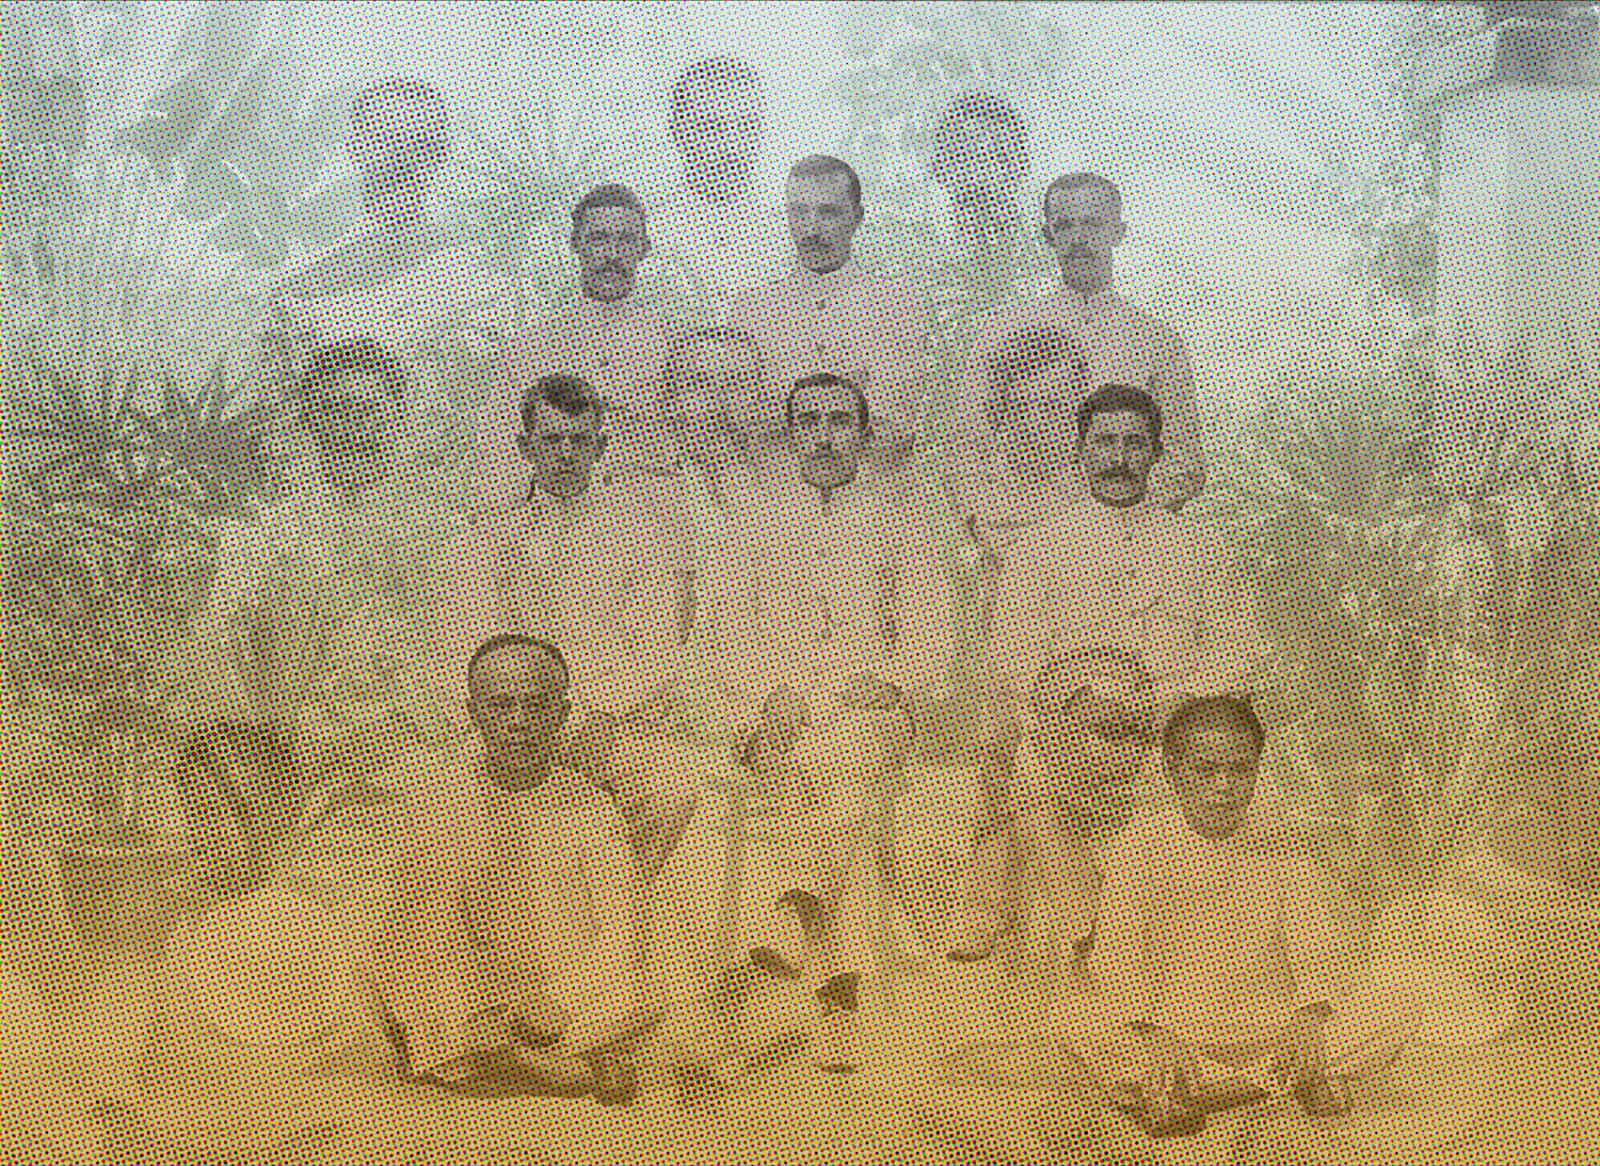 Despite the abolition of slavery by the British Empire in 1855, the empire continued to the practices of
slavery and in significant numbers in South Asia for over a century. The Aesthetics of Disappearance is a project about ‘Houseboys’, the predominant group of indentured servants in the British colonies of Hongkong, Singapore and Darwin from 1800s-1930 whose histories have been erased from mainstream consciousness. I
The source images used in this series were originally commissioned by the Colonists so that they could send the photographs back to Europe showing off their newly found lifestyles. Many photographs feature their prized possessions such as the popular Waler pony imported from Australia, but along with livestock, many chose to showcase their servants as well. They were regarded as commodity and often traded as such.
By compositing the archival images with artifacts of photography-based technologies such as moire,
halftone color separation and various optical illusions, the artist alludes to how history can be censored
and interpreted with bias by those in authority. It is also a counterstrategy to alter the intended functions
of the original photographs in honor of the houseboys and to all who are resisting for freedom.